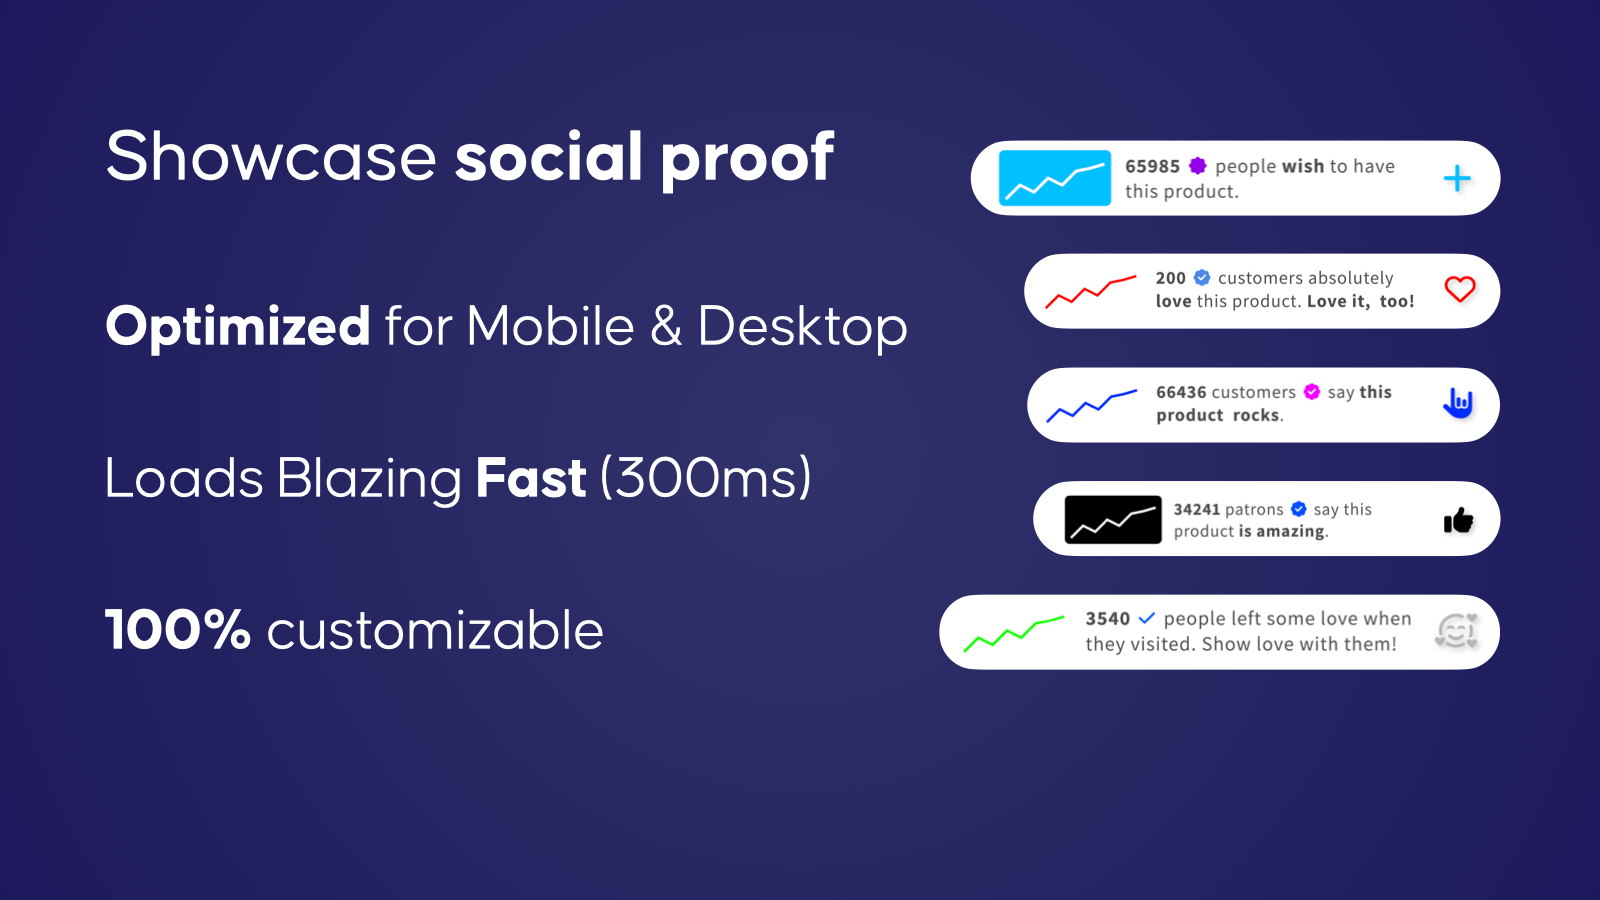 Showcase social proof with Like Genius